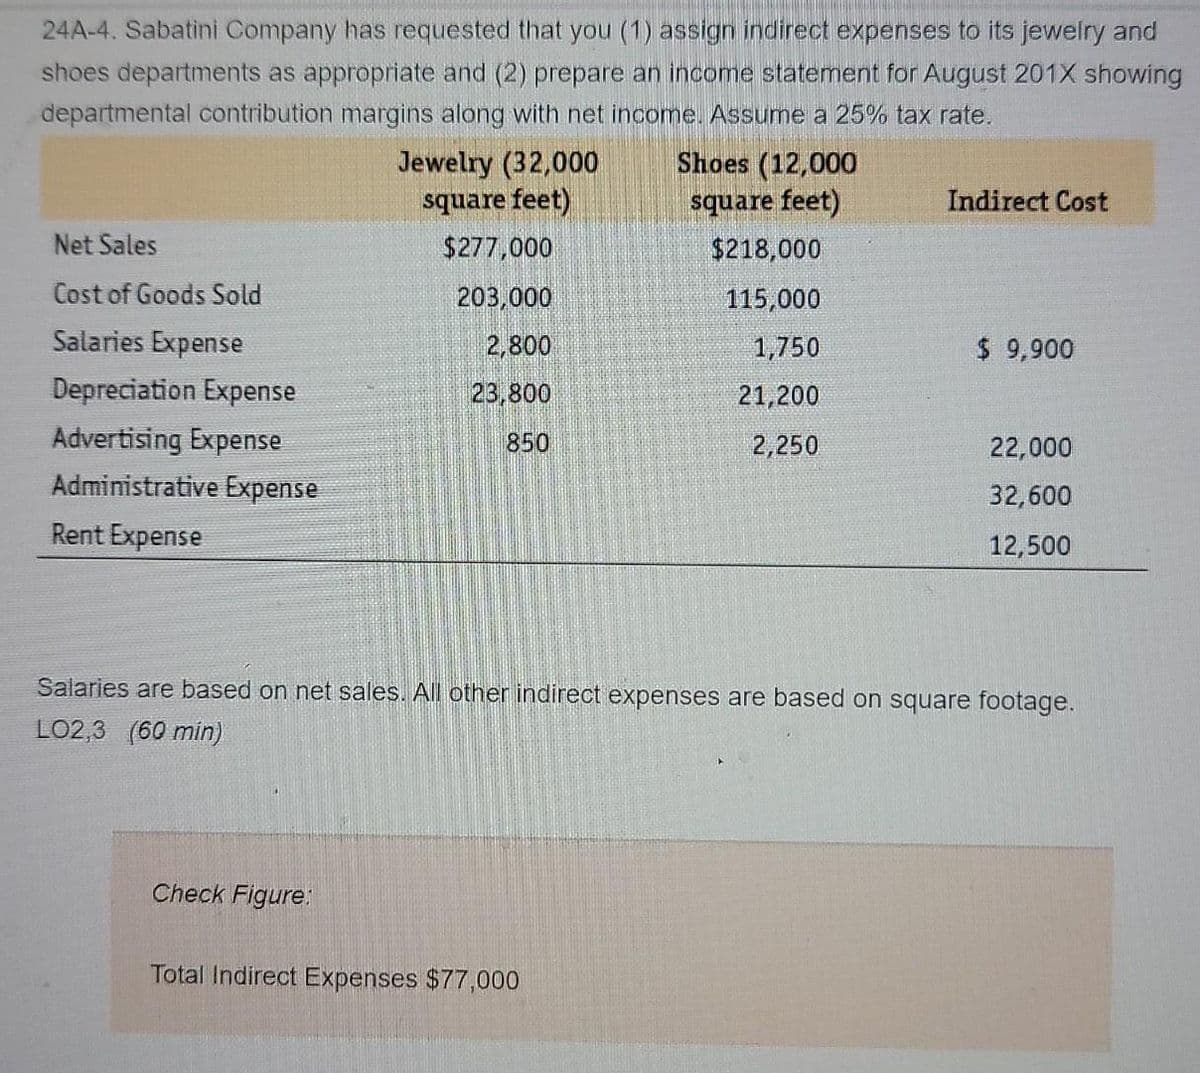 24A-4. Sabatini Company has requested that you (1) assign indirect expenses to its jewelry and
shoes departments as appropriate and (2) prepare an income statement for August 201X showing
departmental contribution margins along with net income. Assume a 25% tax rate.
Jewelry (32,000
square feet)
Shoes (12,000
square feet)
Indirect Cost
Net Sales
$277,000
$218,000
Cost of Goods Sold
203,000
115,000
Salaries Expense
2,800
1,750
$ 9,900
Depreciation Expense
23,800
21,200
Advertising Expense
Administrative Expense
850
2,250
22,000
32,600
Rent Expense
12,500
Salaries are based on net sales. All other indirect expenses are based on square footage.
LO2,3 (60 min)
Check Figure:
Total Indirect Expenses $77,000
